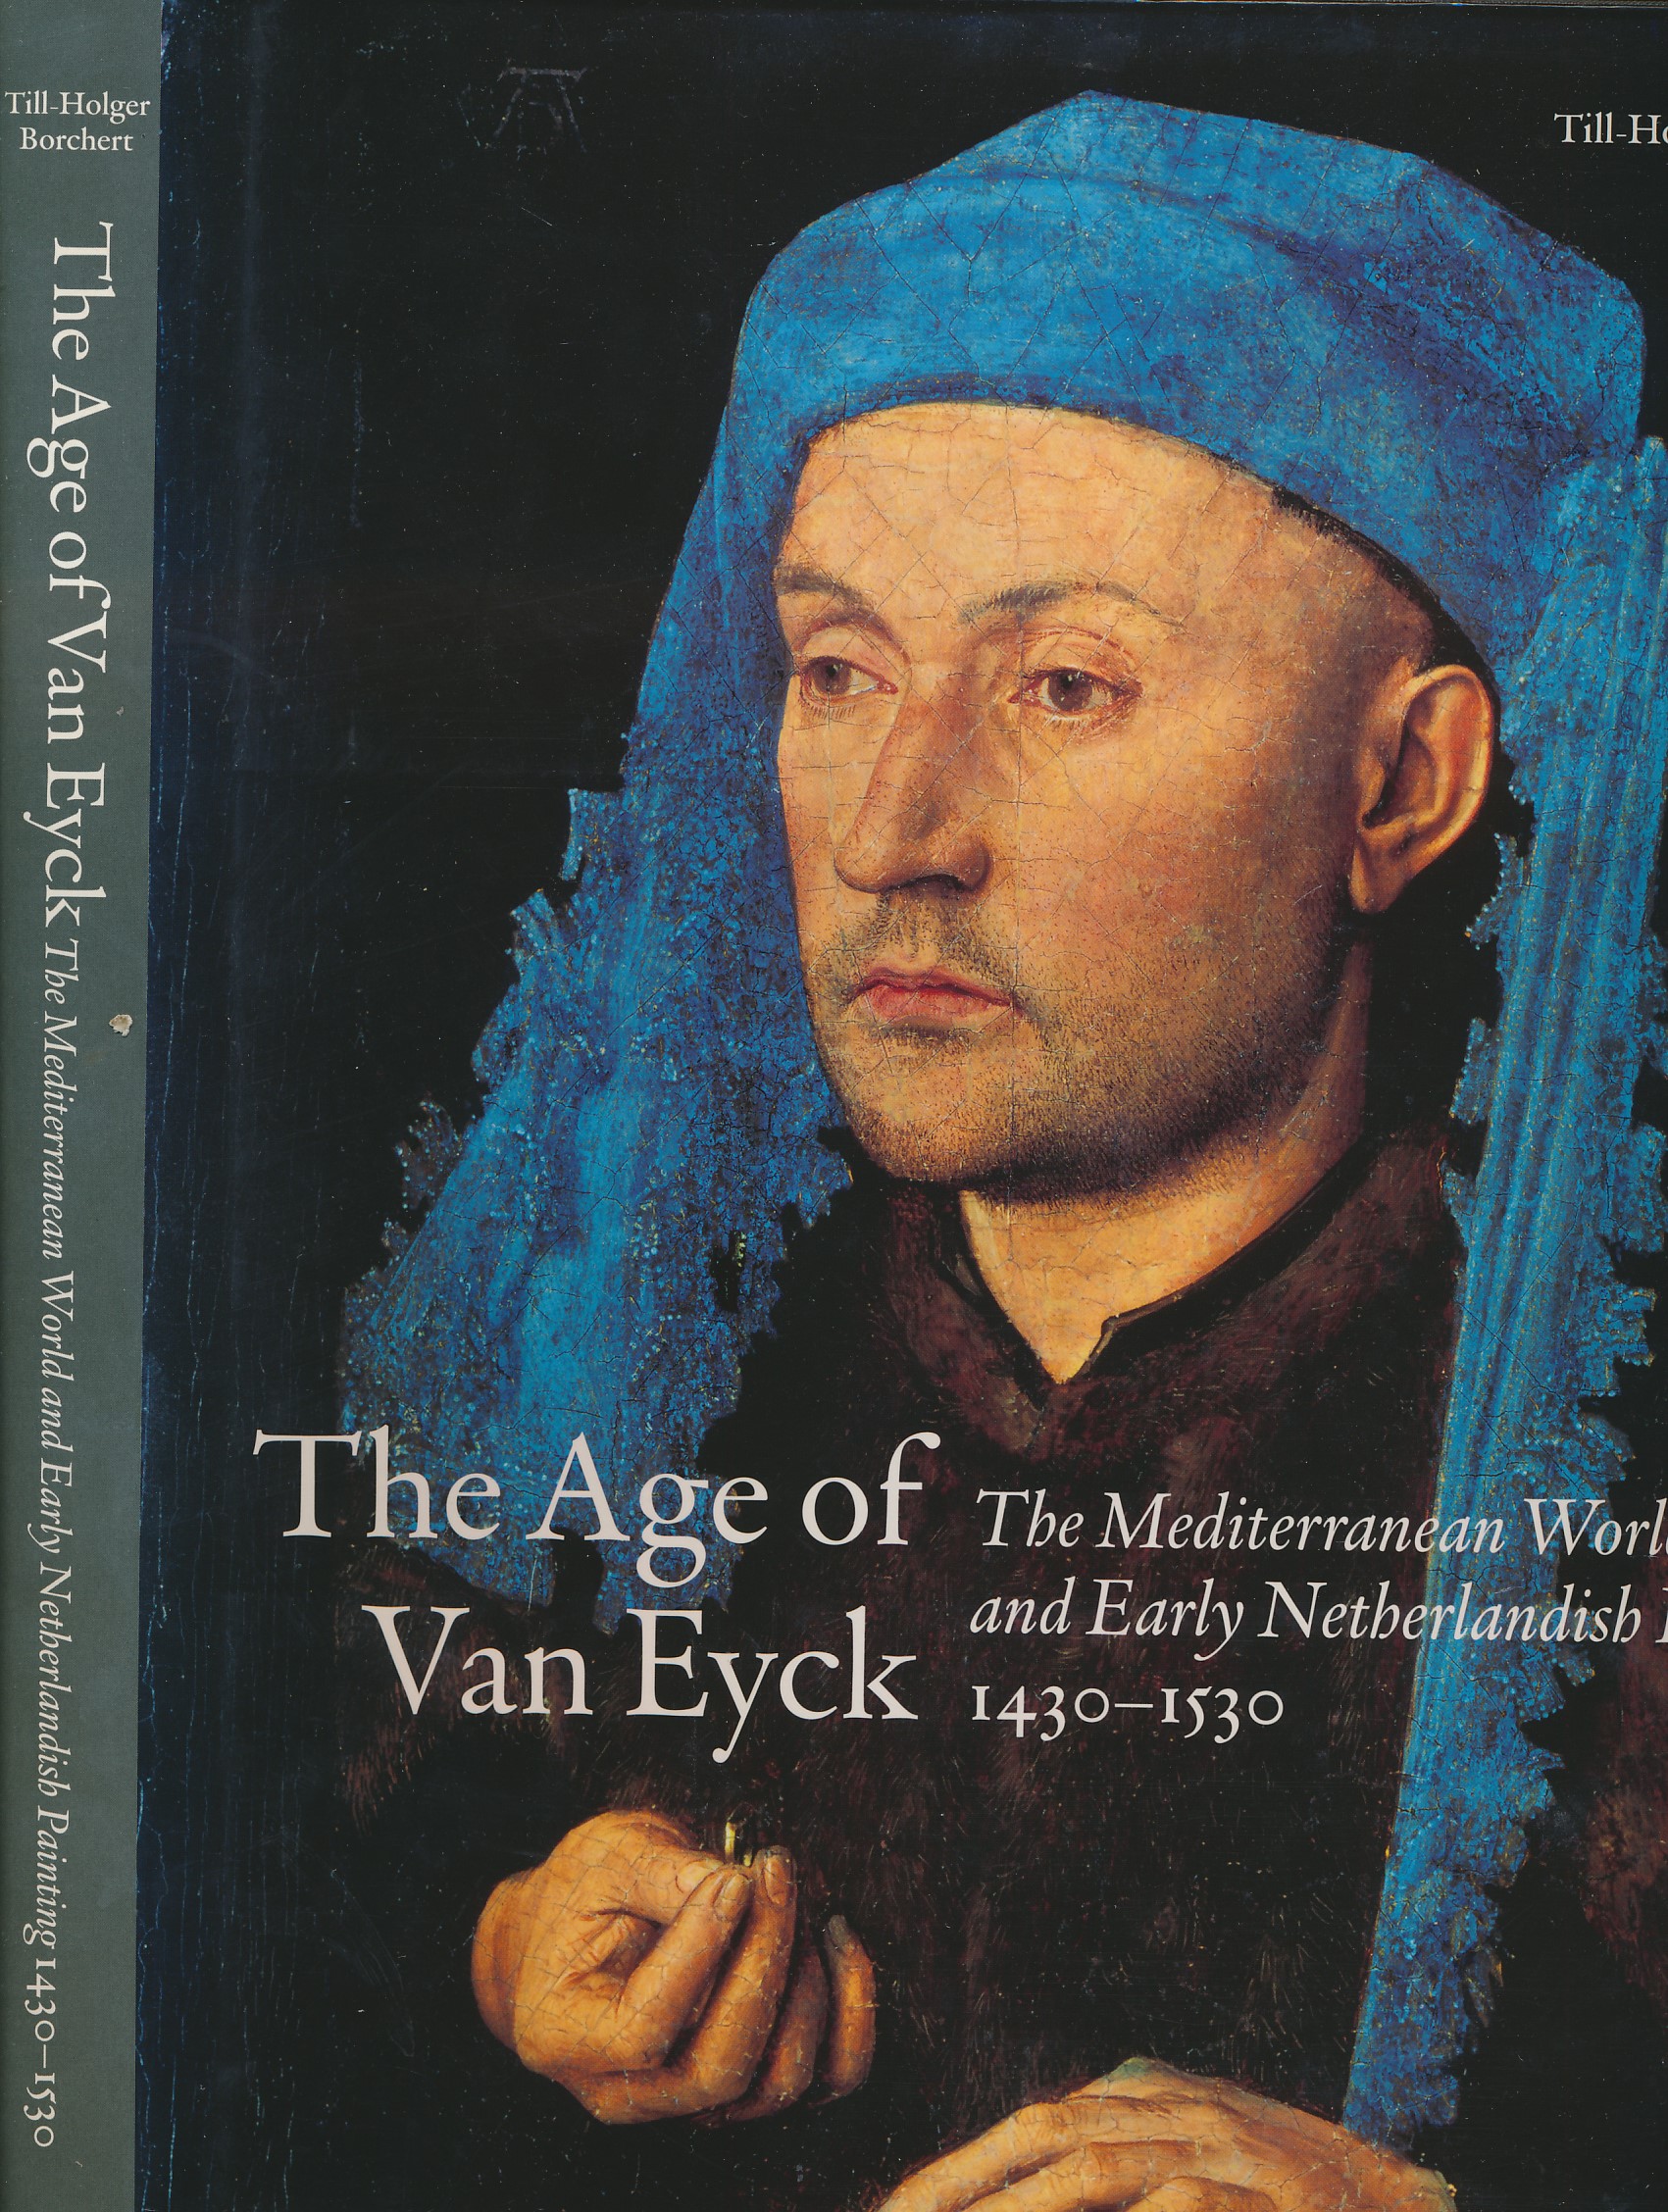 The Age of Van Eyck. The Mediterranean World and Early Netherlandish Painting 1430-1530